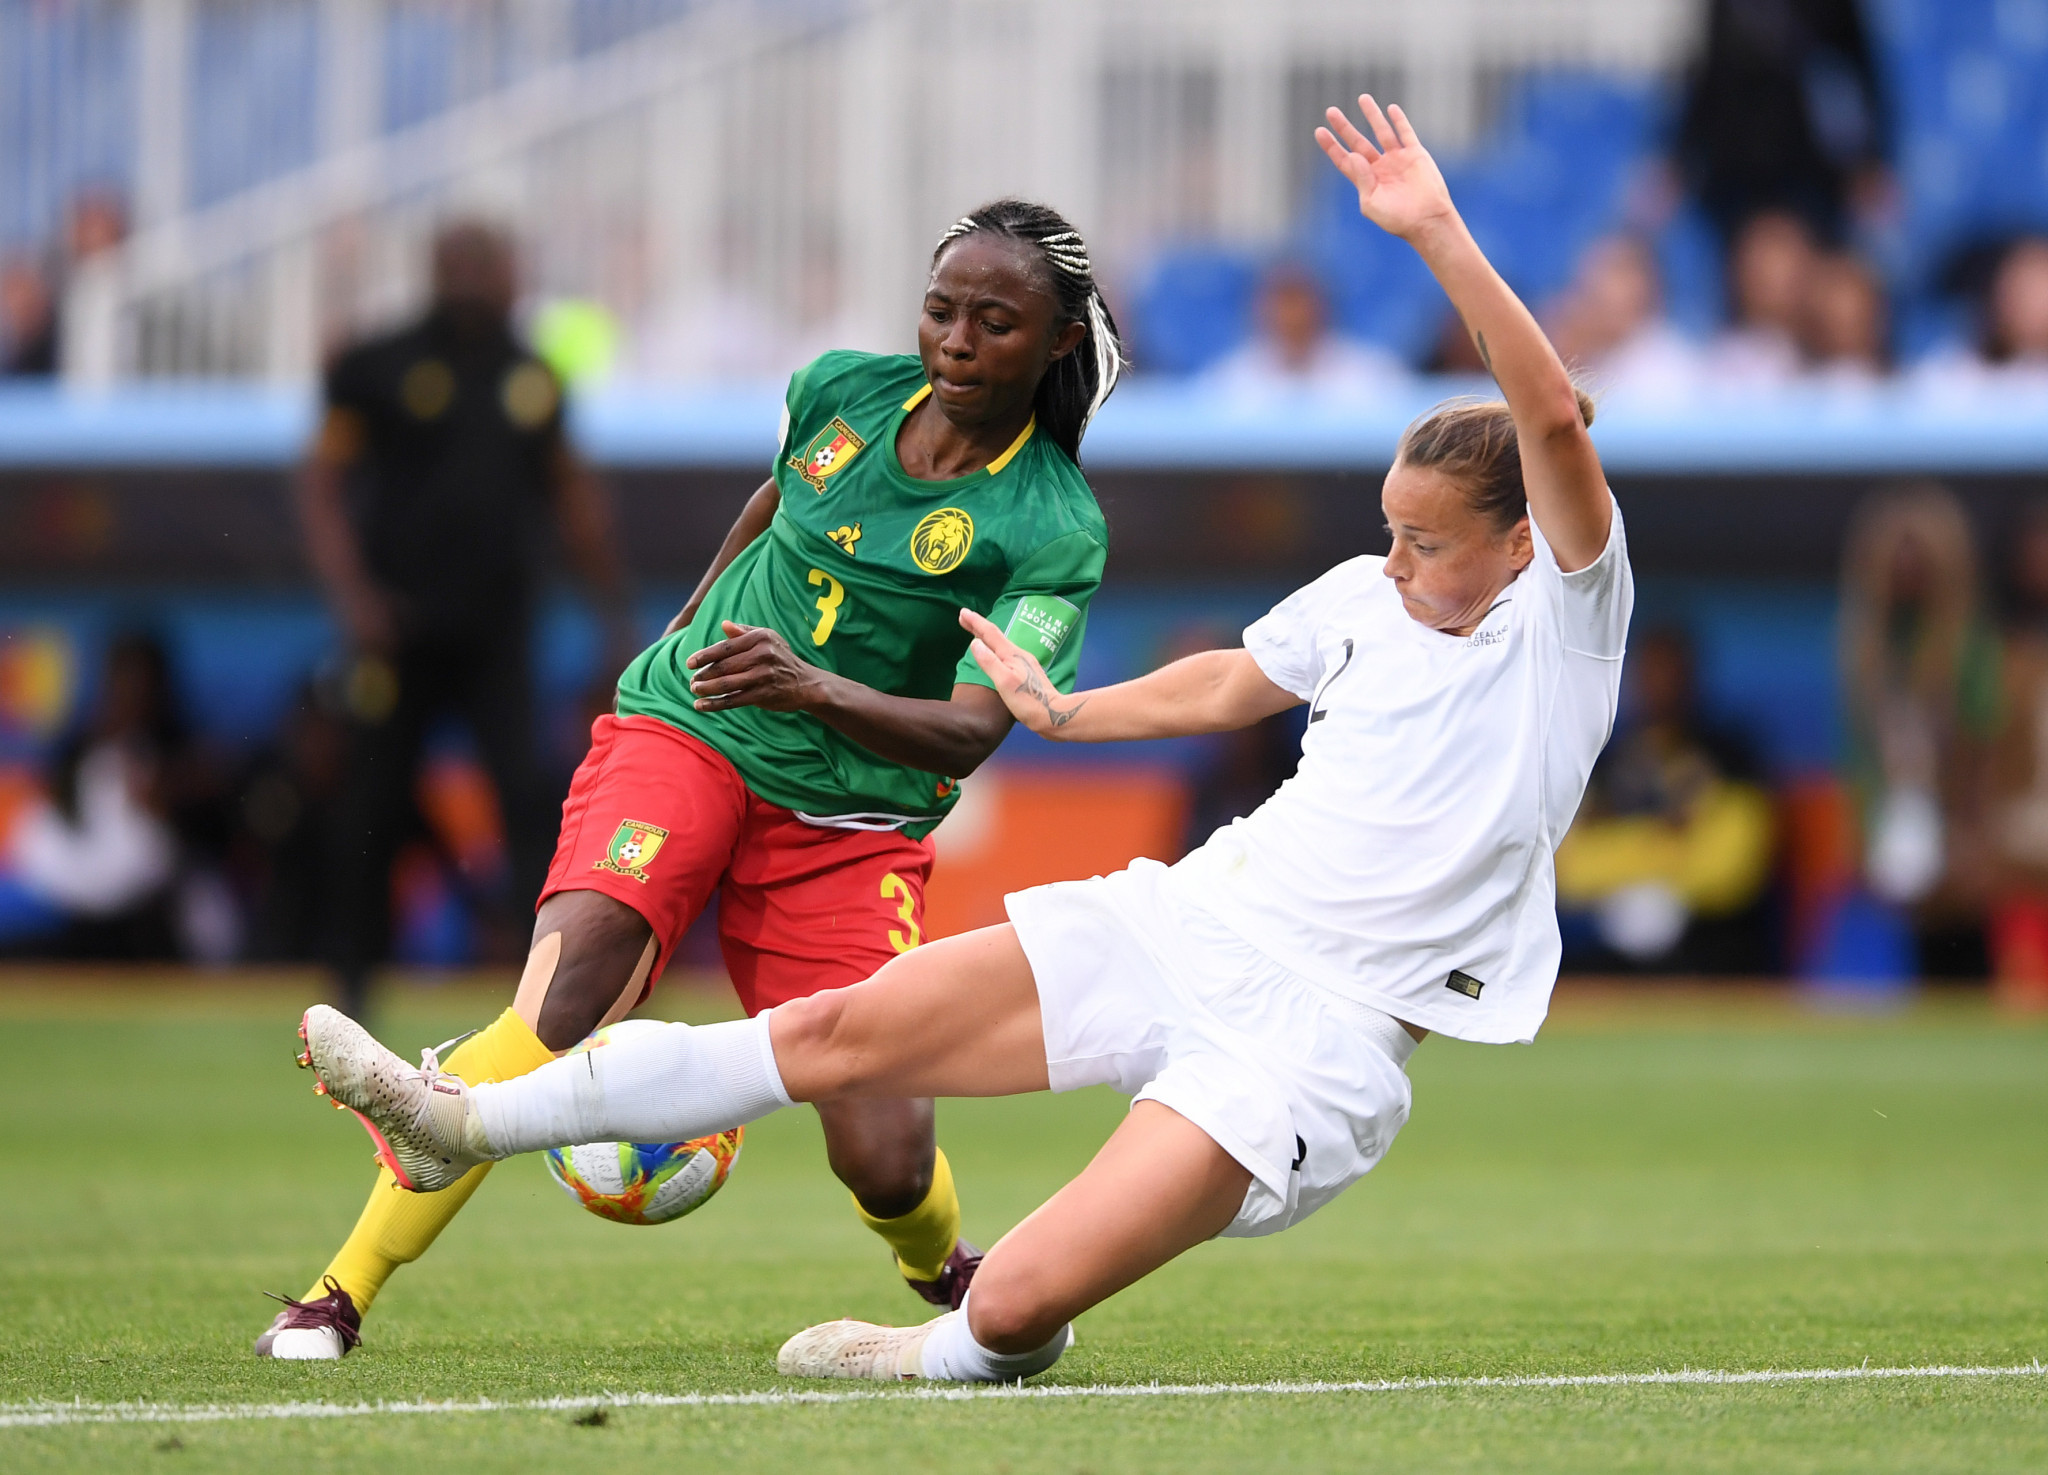 Cameroon needed to win against New Zealand to progress into the knockout stage, with Ajara Nchout opening the scoring for her side ©Getty Images